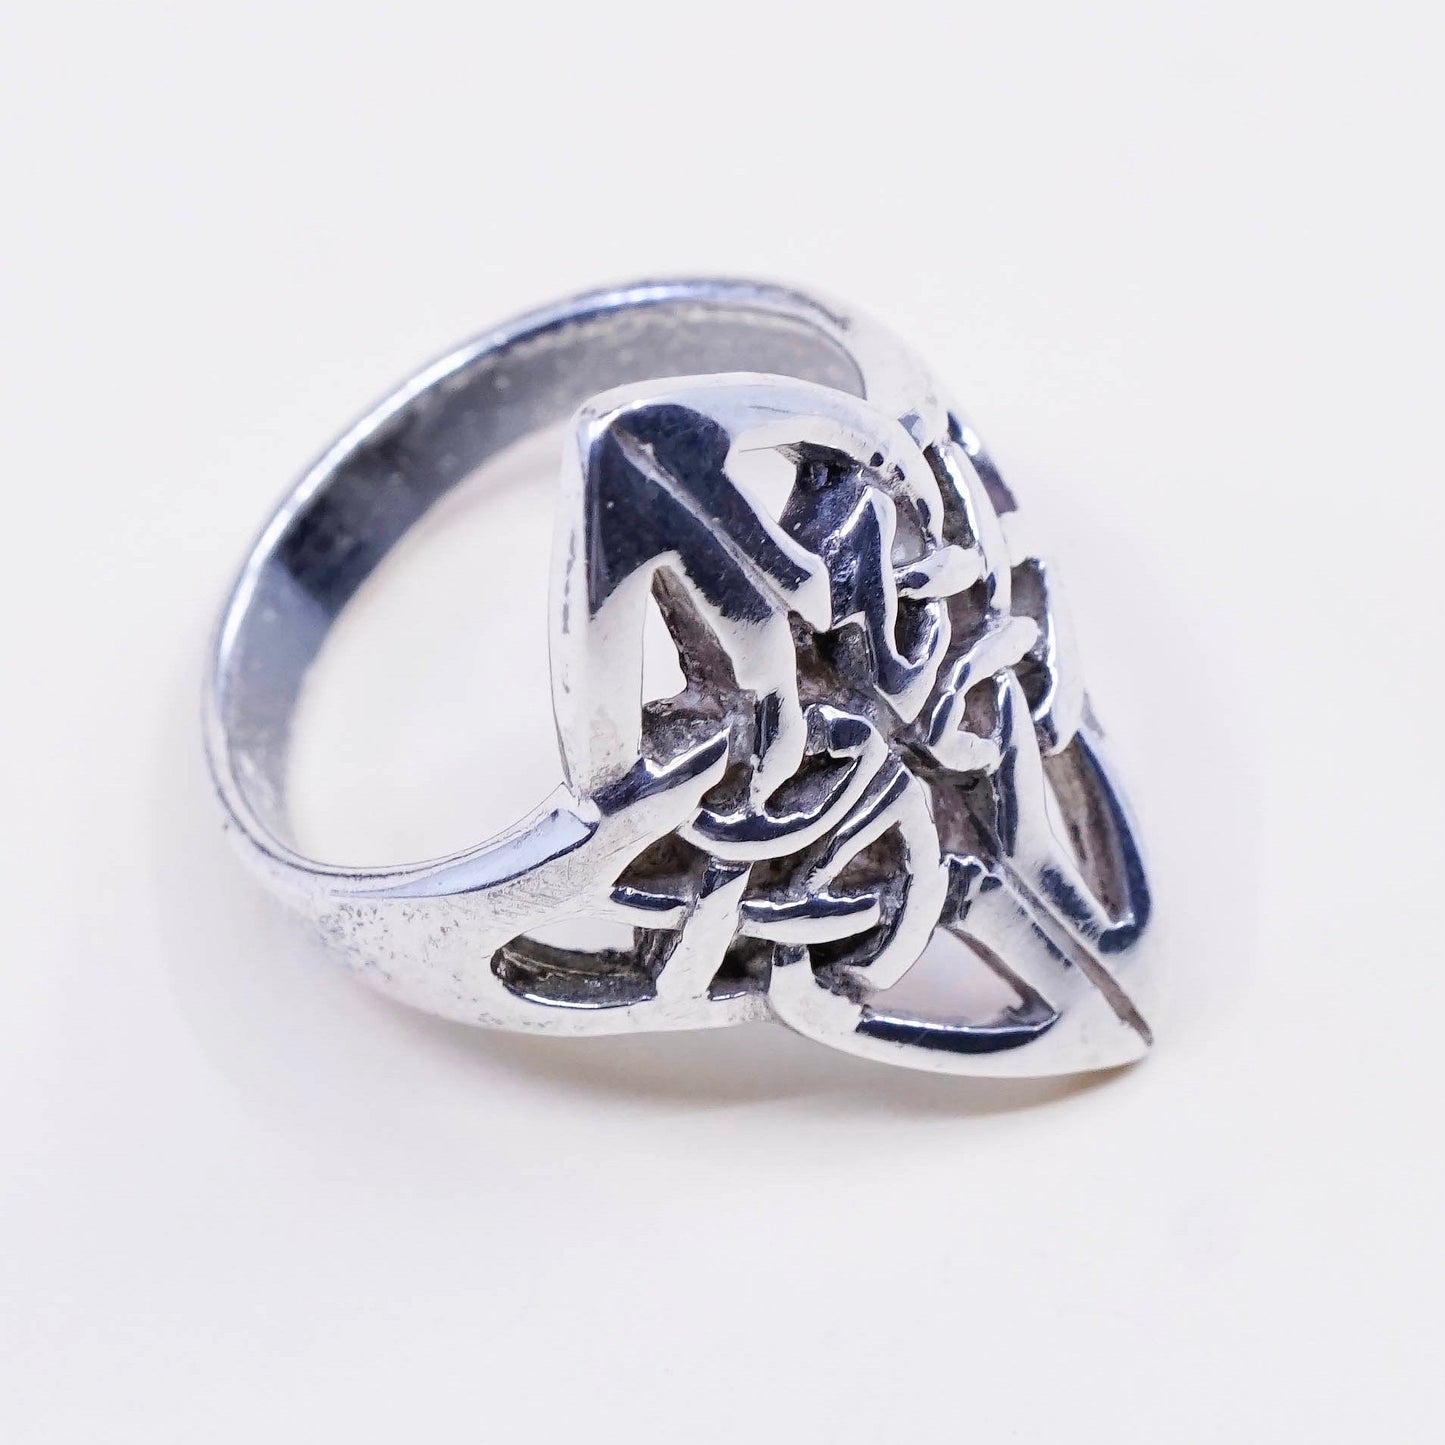 sz 7.25, vtg sterling silver handmade wired ring, 925 irish entwined knot band